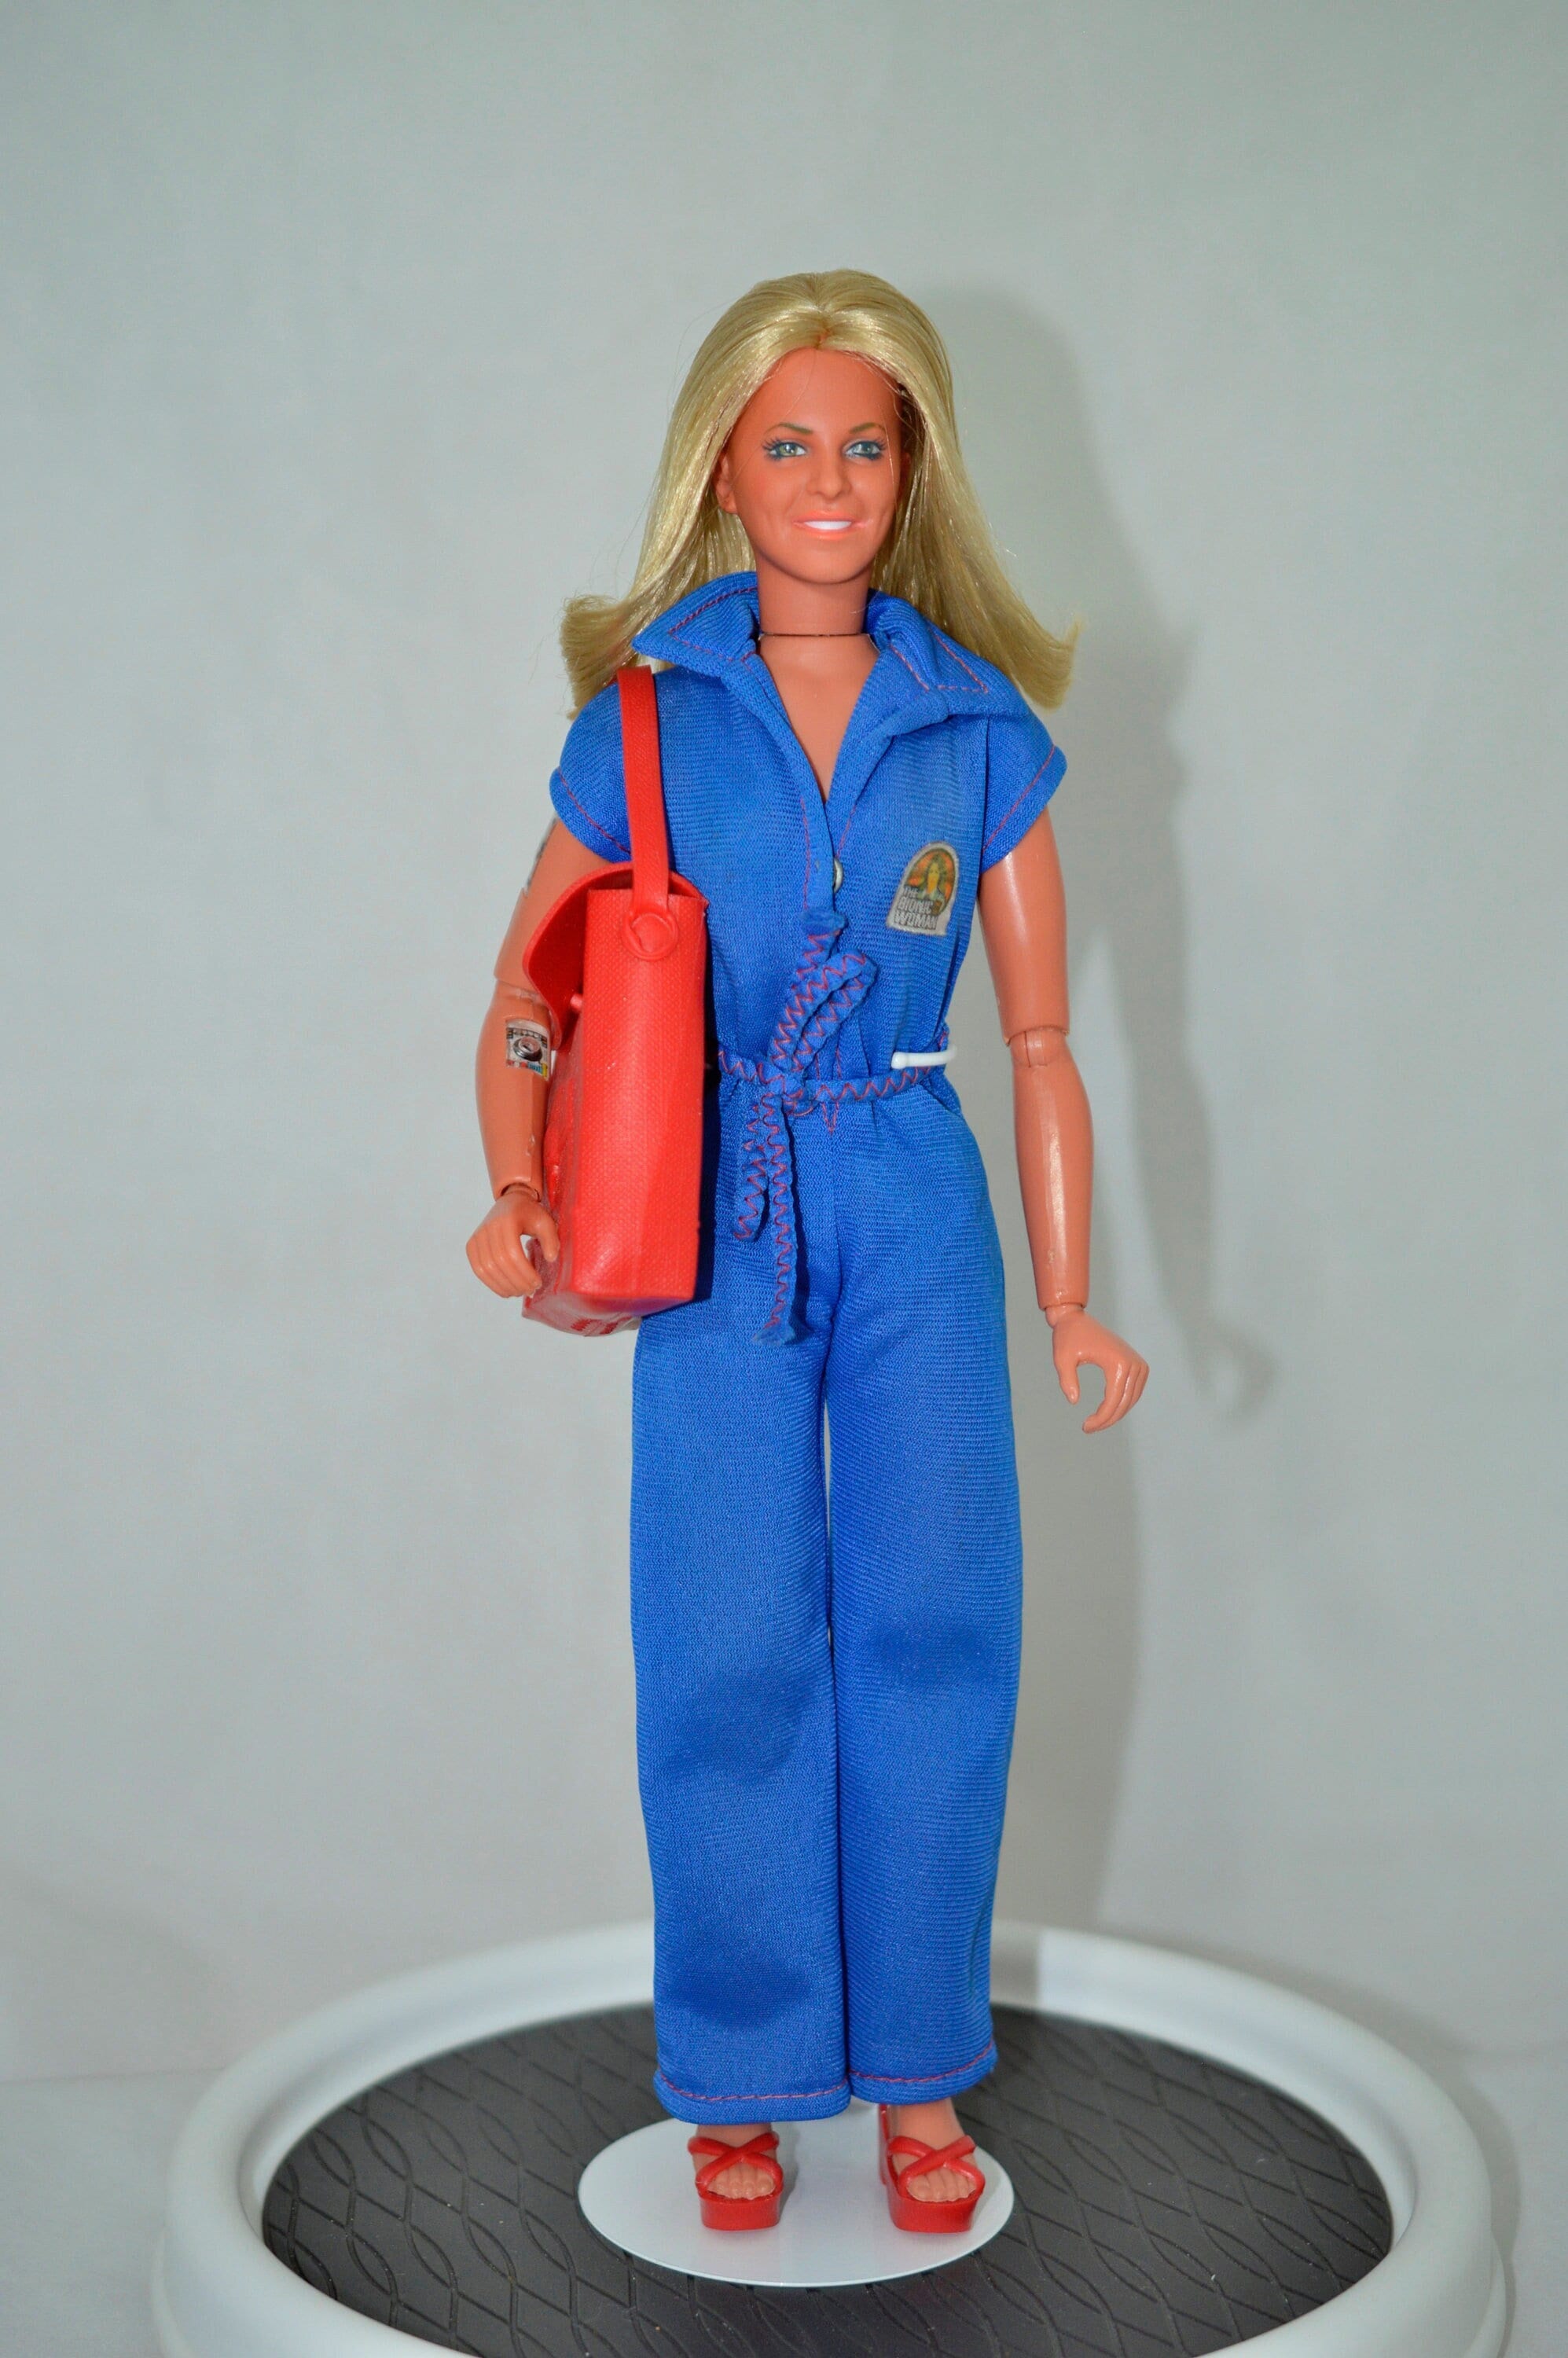 Bionic Woman Jaime Sommers Original Outfit, Purse & Accessories Kenner Doll  1976 General Mills H. K. Action Figure Six Million Dollar Man -  Canada